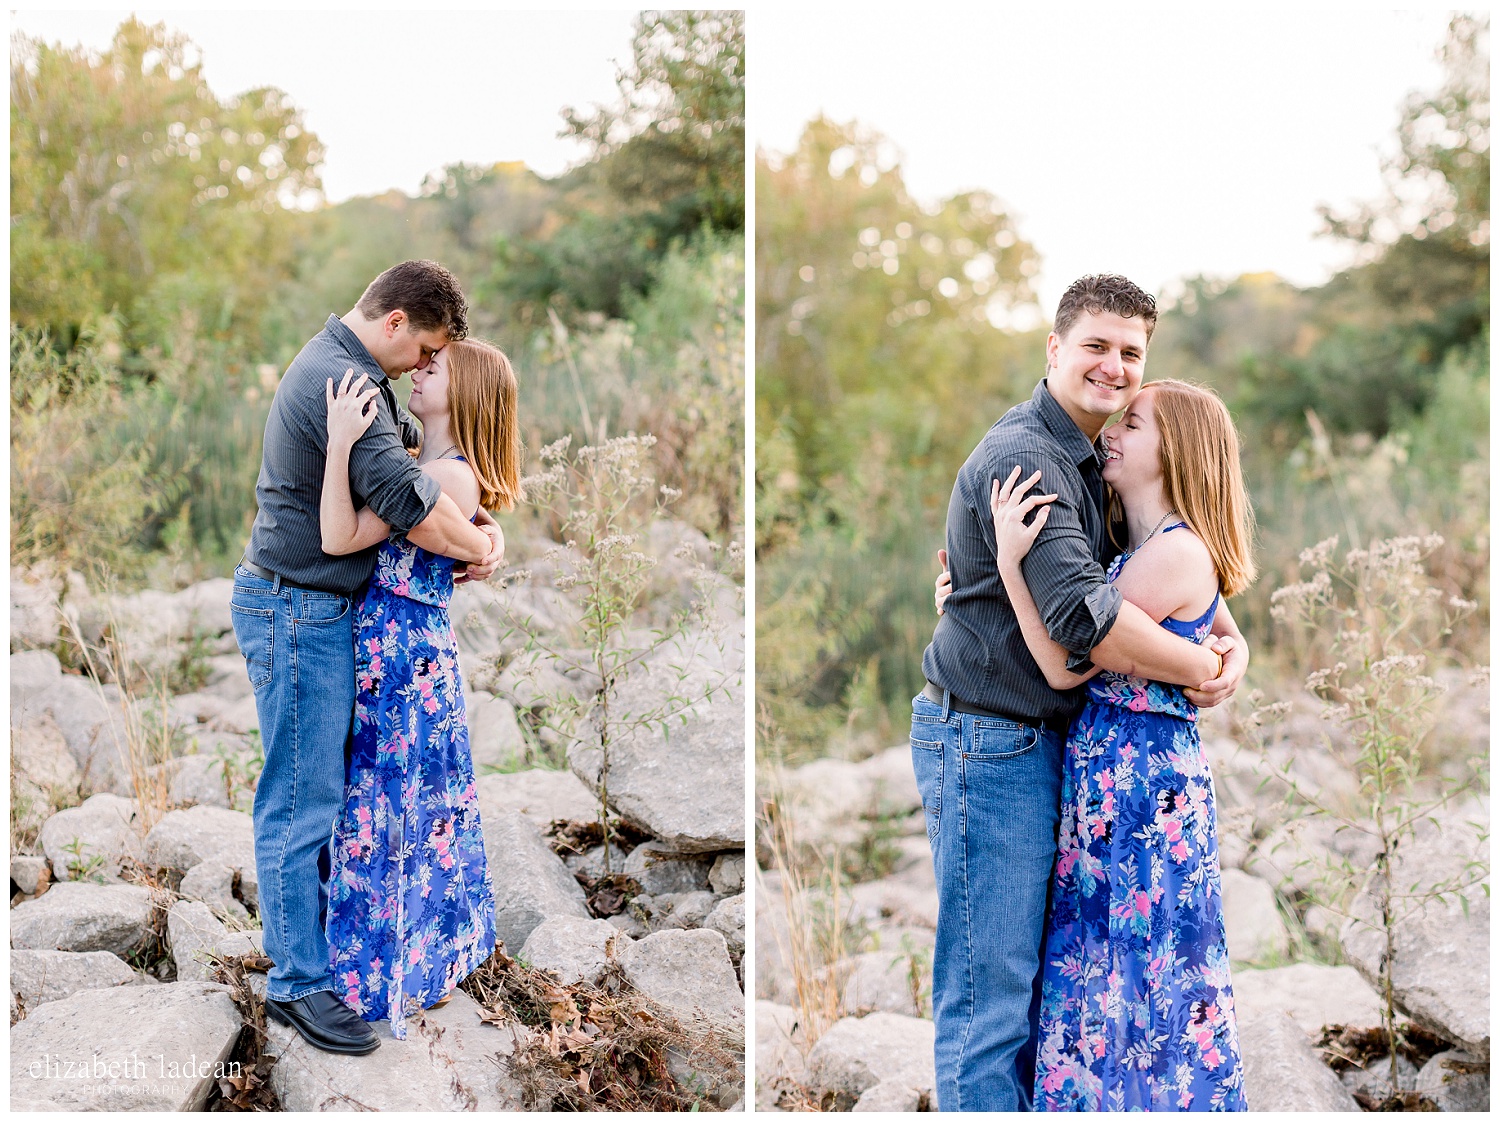 Northland-KC-Fall-Engagement-Photos-with-dog-A+B-2018-elizabeth-ladean-photography-photo_1499.jpg